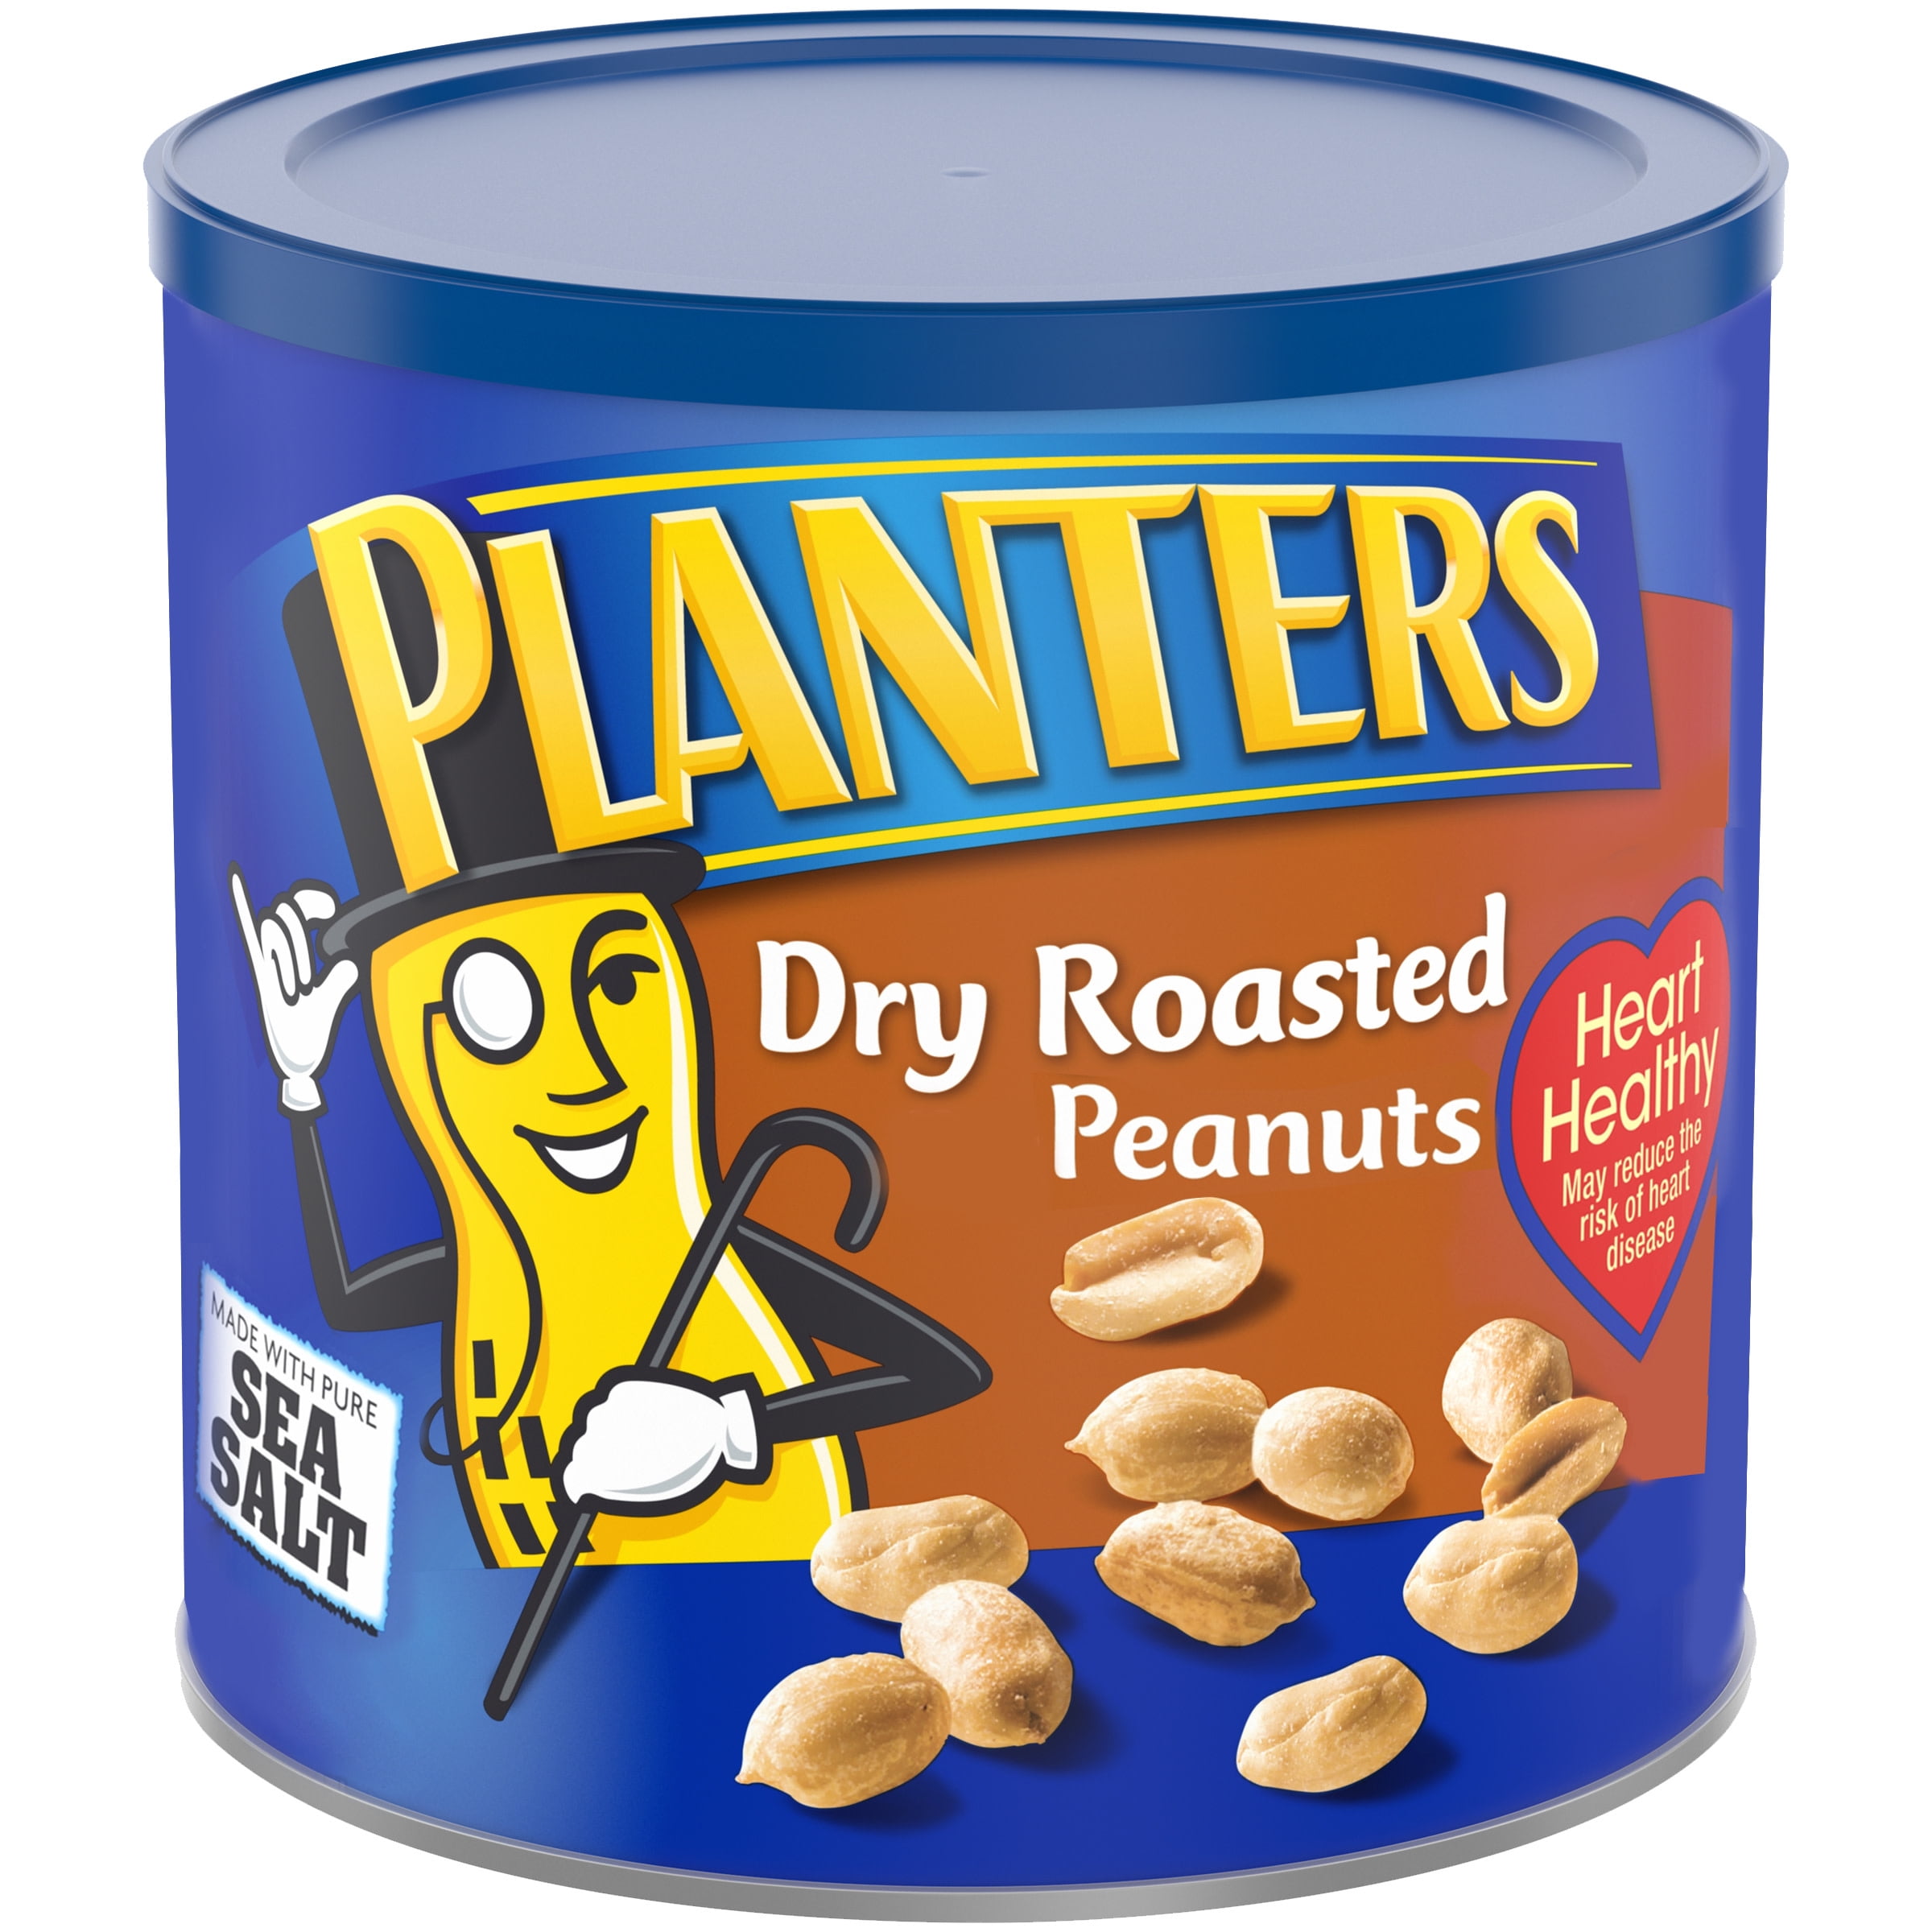 Planters Dry Roasted Peanuts 325 Lb Canister 